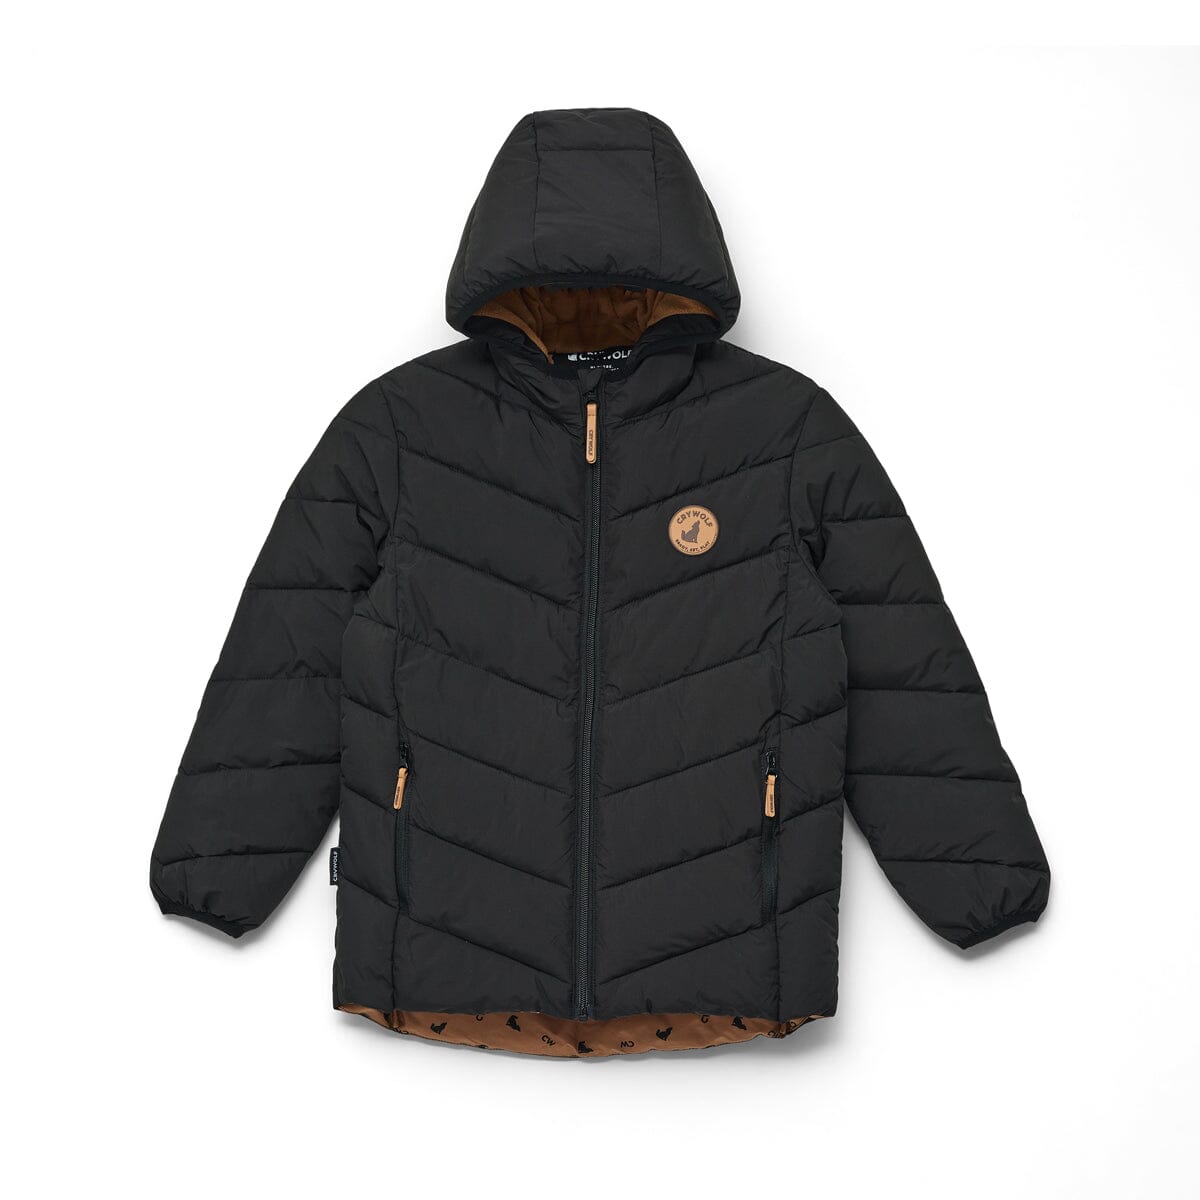 Crywolf | ECO PUFFER - Black *** PRE ORDER / DUE EARLY-MID APRIL *** Girls Crywolf